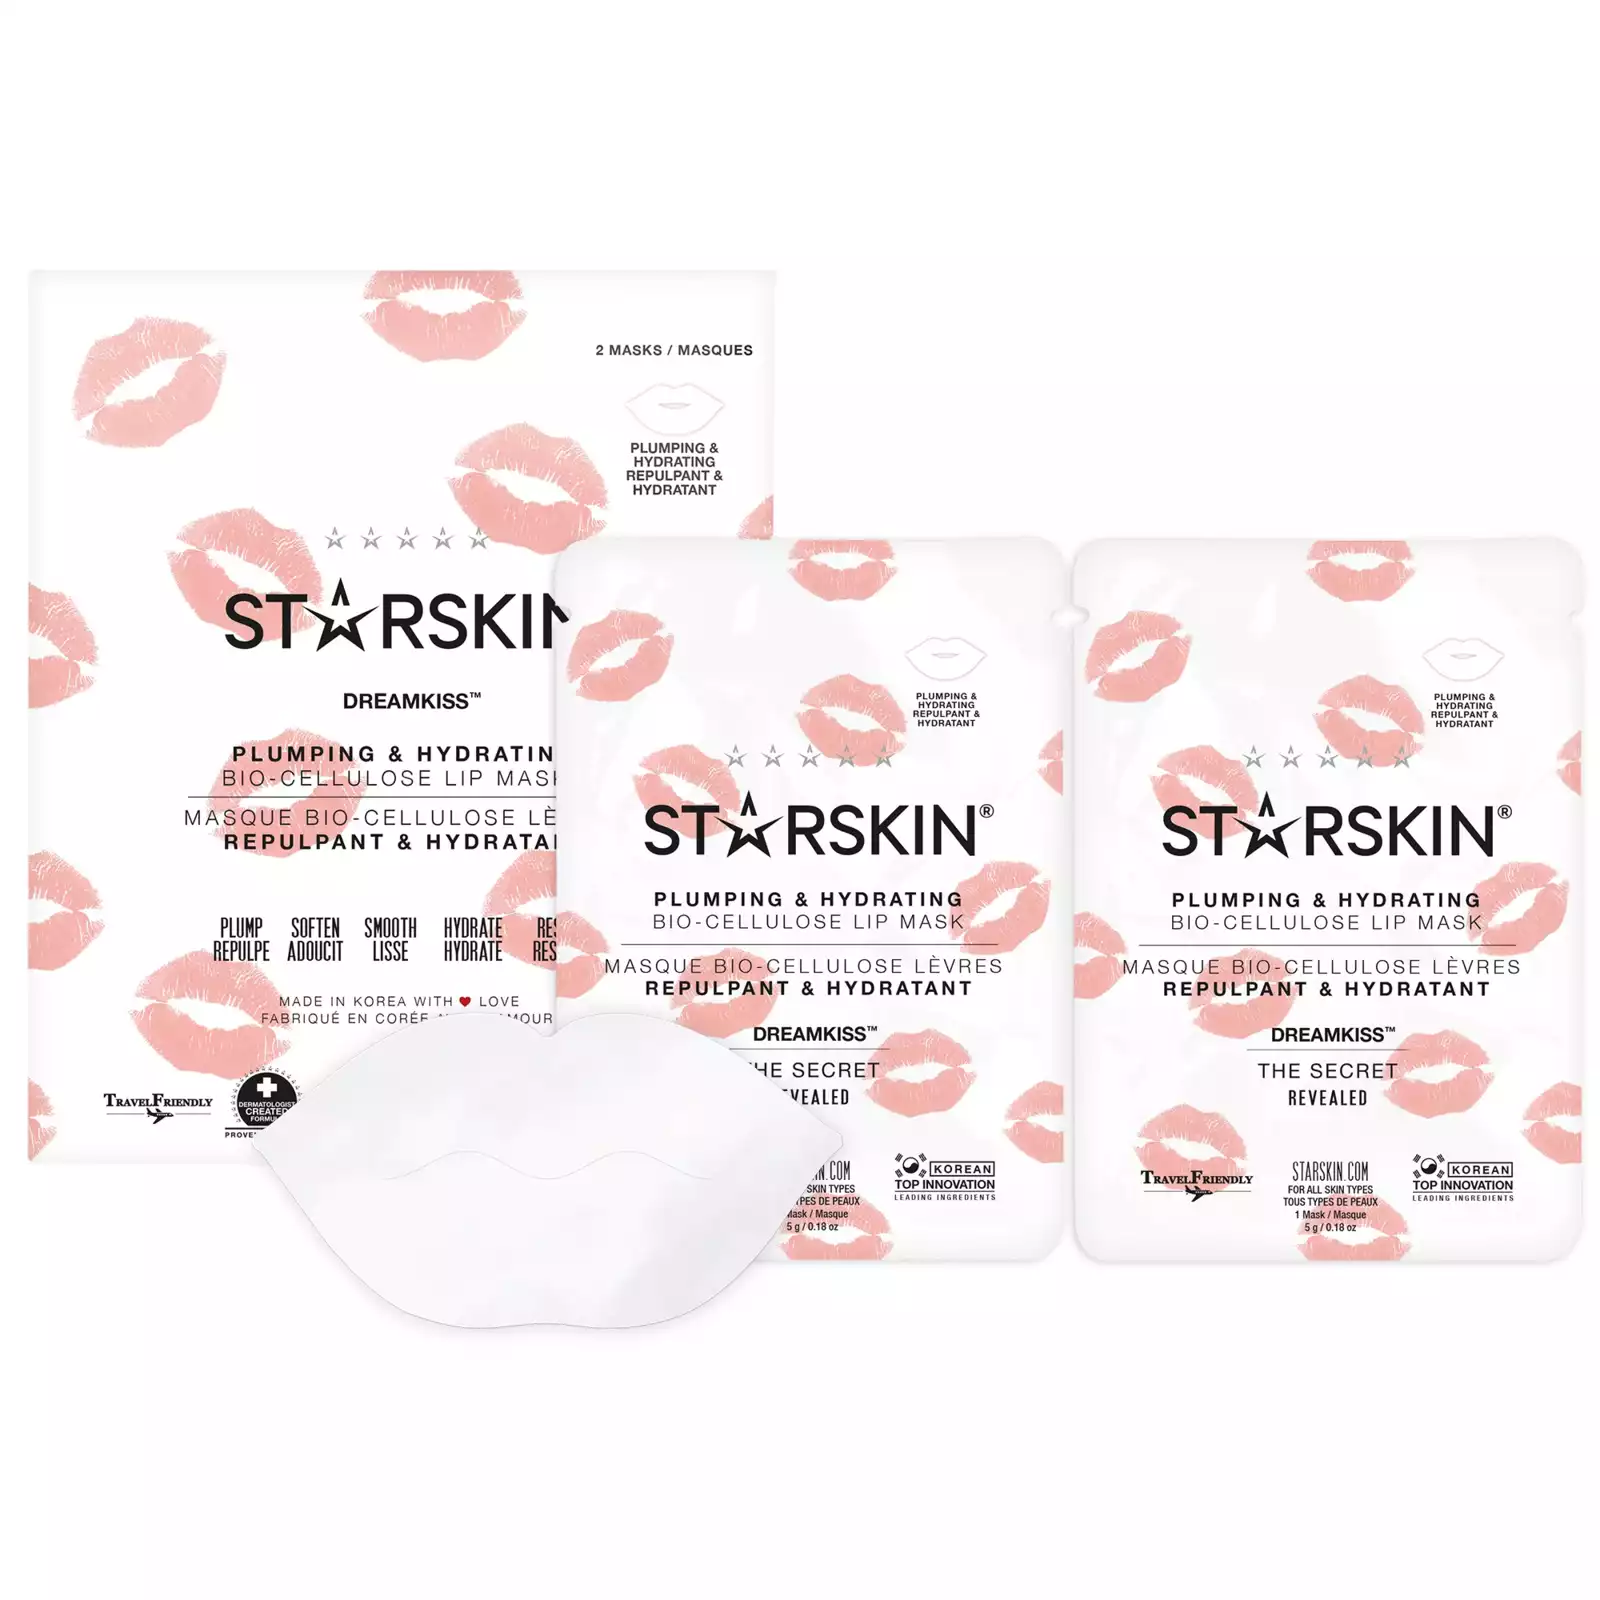 Dreamkiss plumping and hydrating bio-cellulose second skin mask